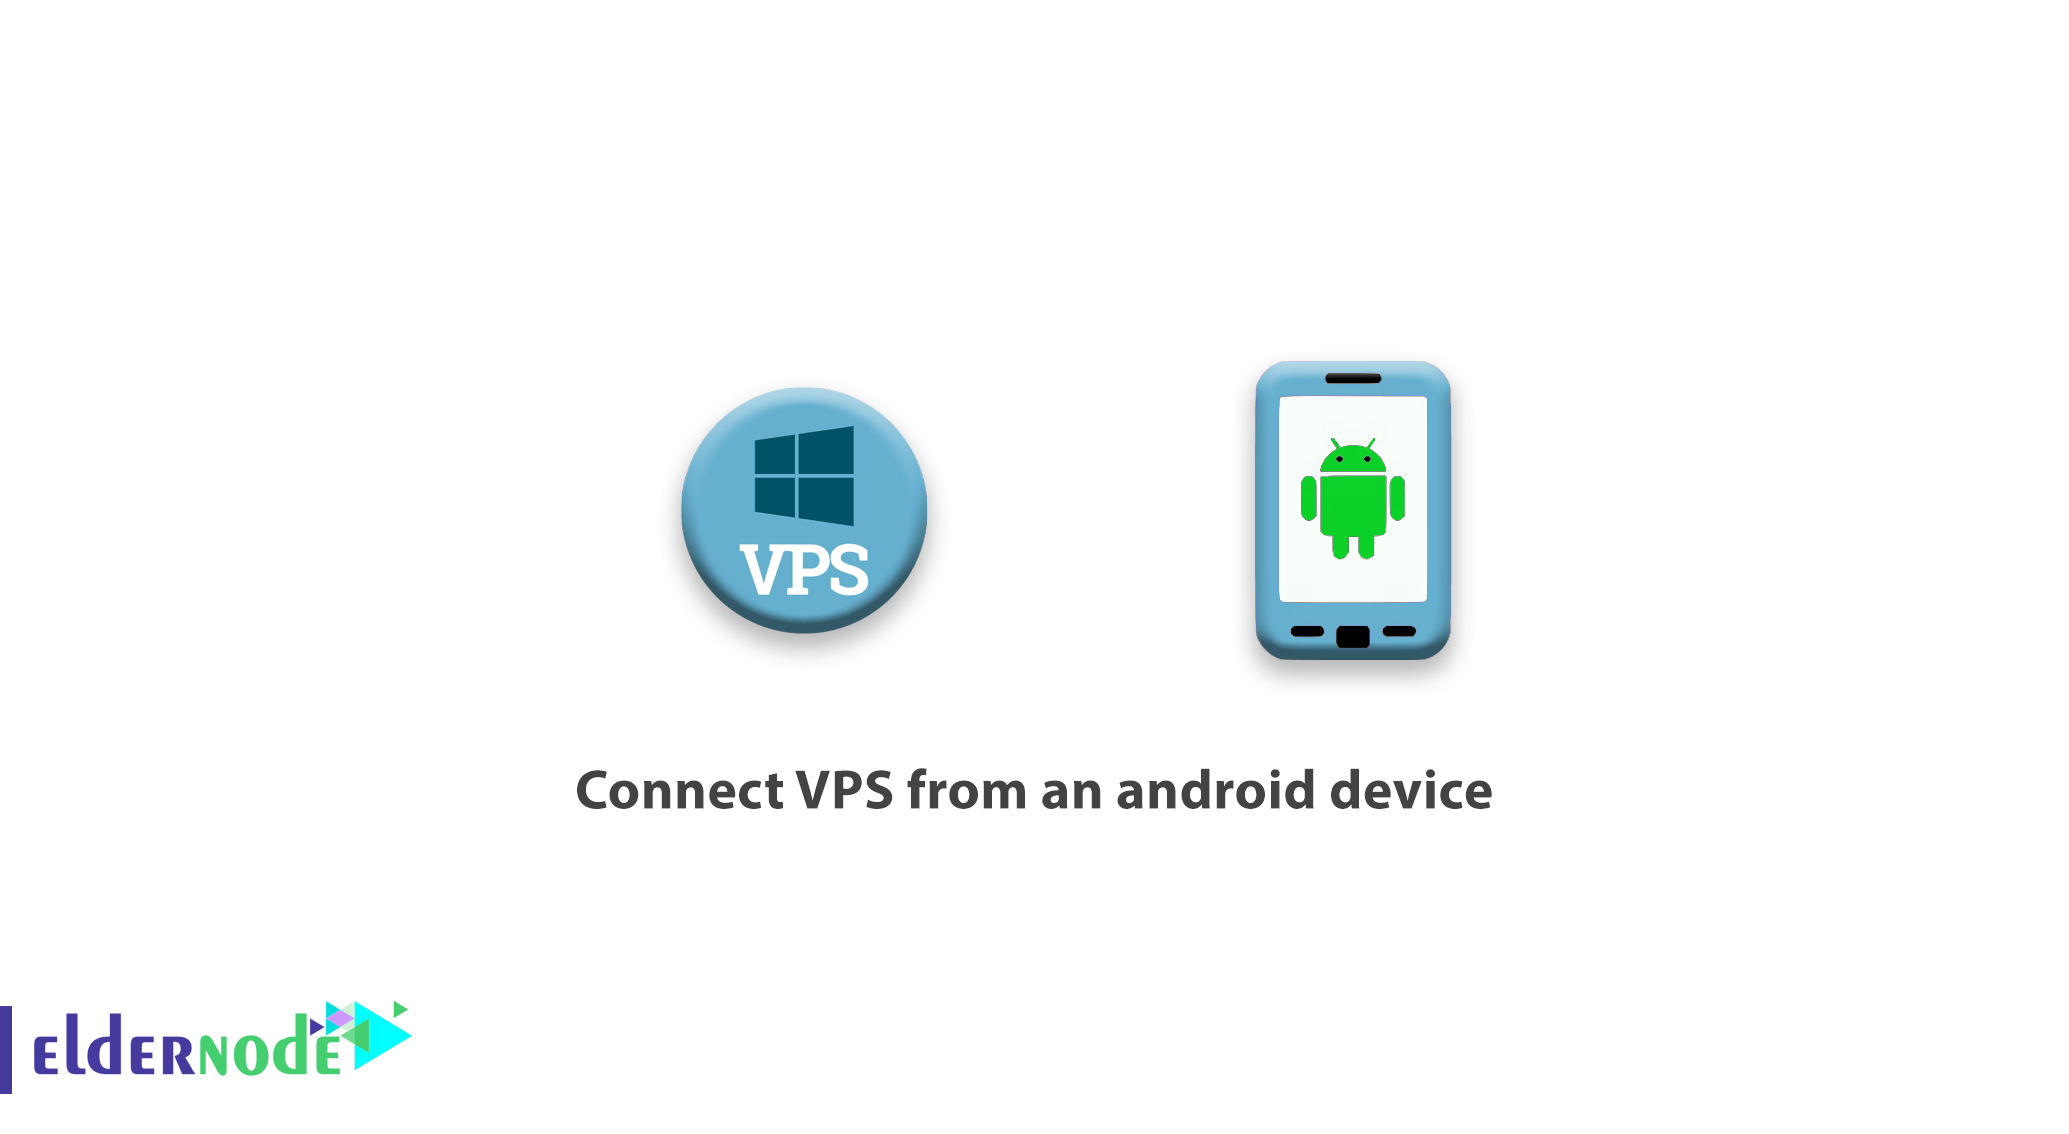 How to connect VPS from an android device